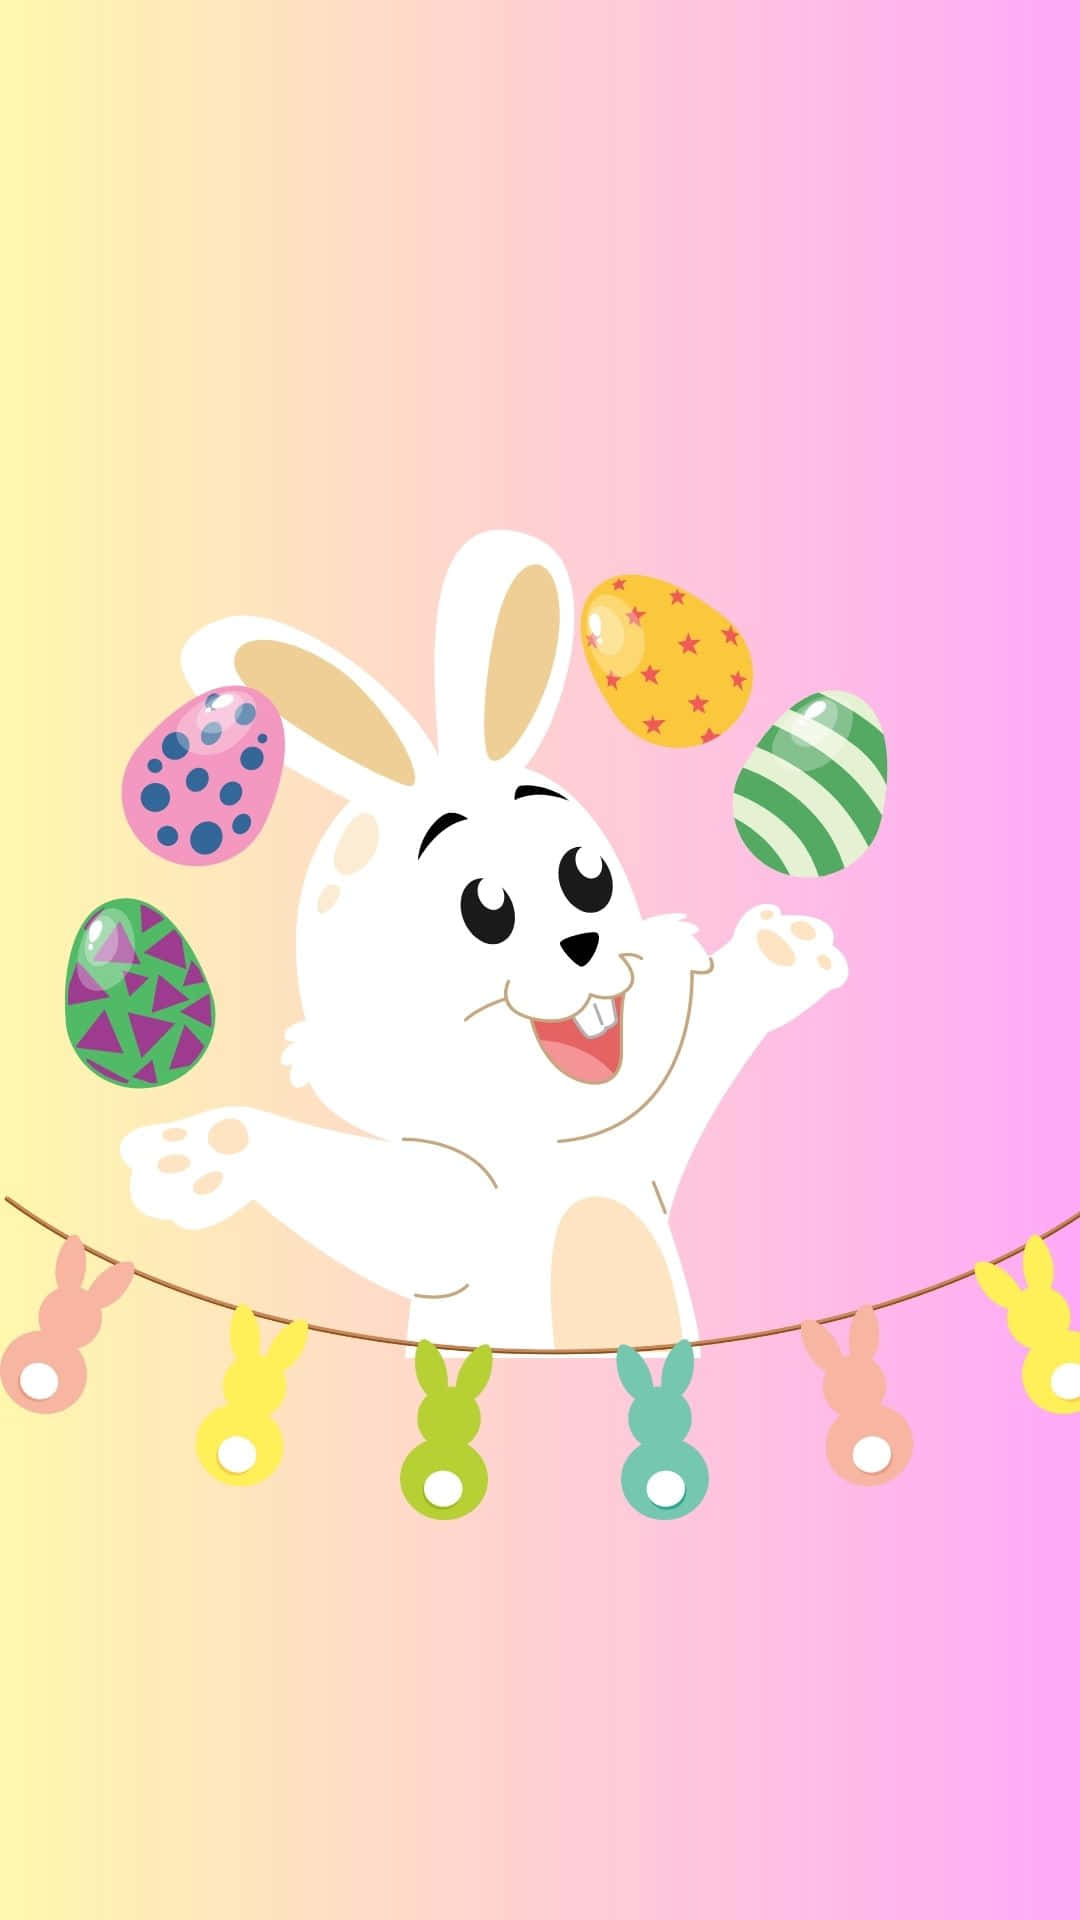 A Festive Easter Bunny Decorating Eggs To Celebrate The Holiday. Background